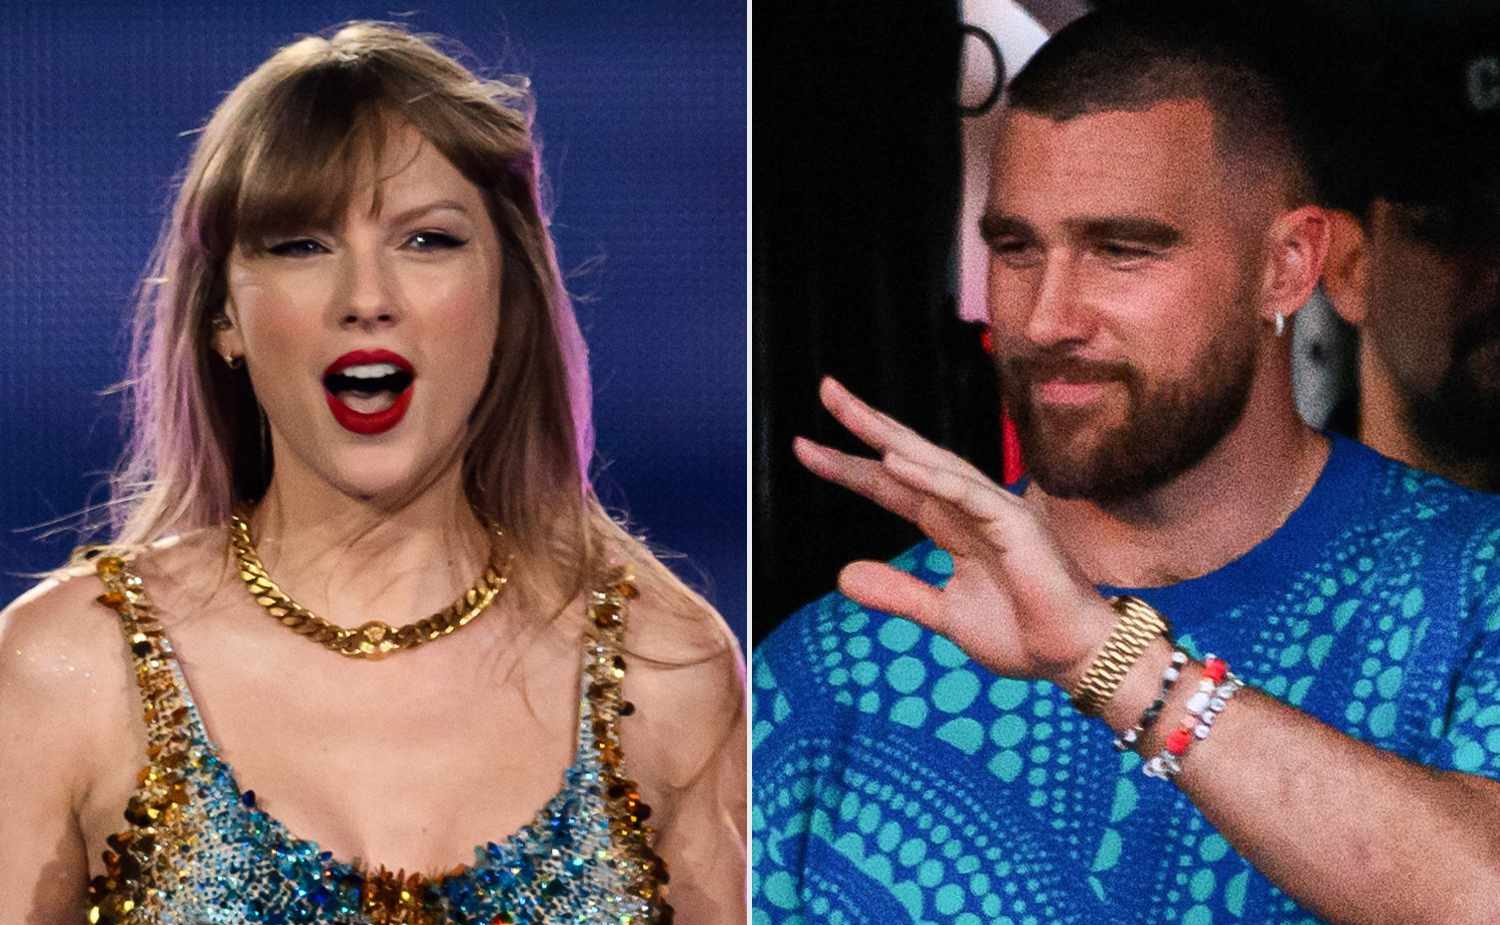 When inquired by her close friends in Sydney about her boyfriend Travis Kelce's updated appearance, Taylor remarked, "Honestly, I find these trimmed beards more appealing than the Super Bowl looks." She continued, "Although the long beards have their charm, this new style enhances my..."